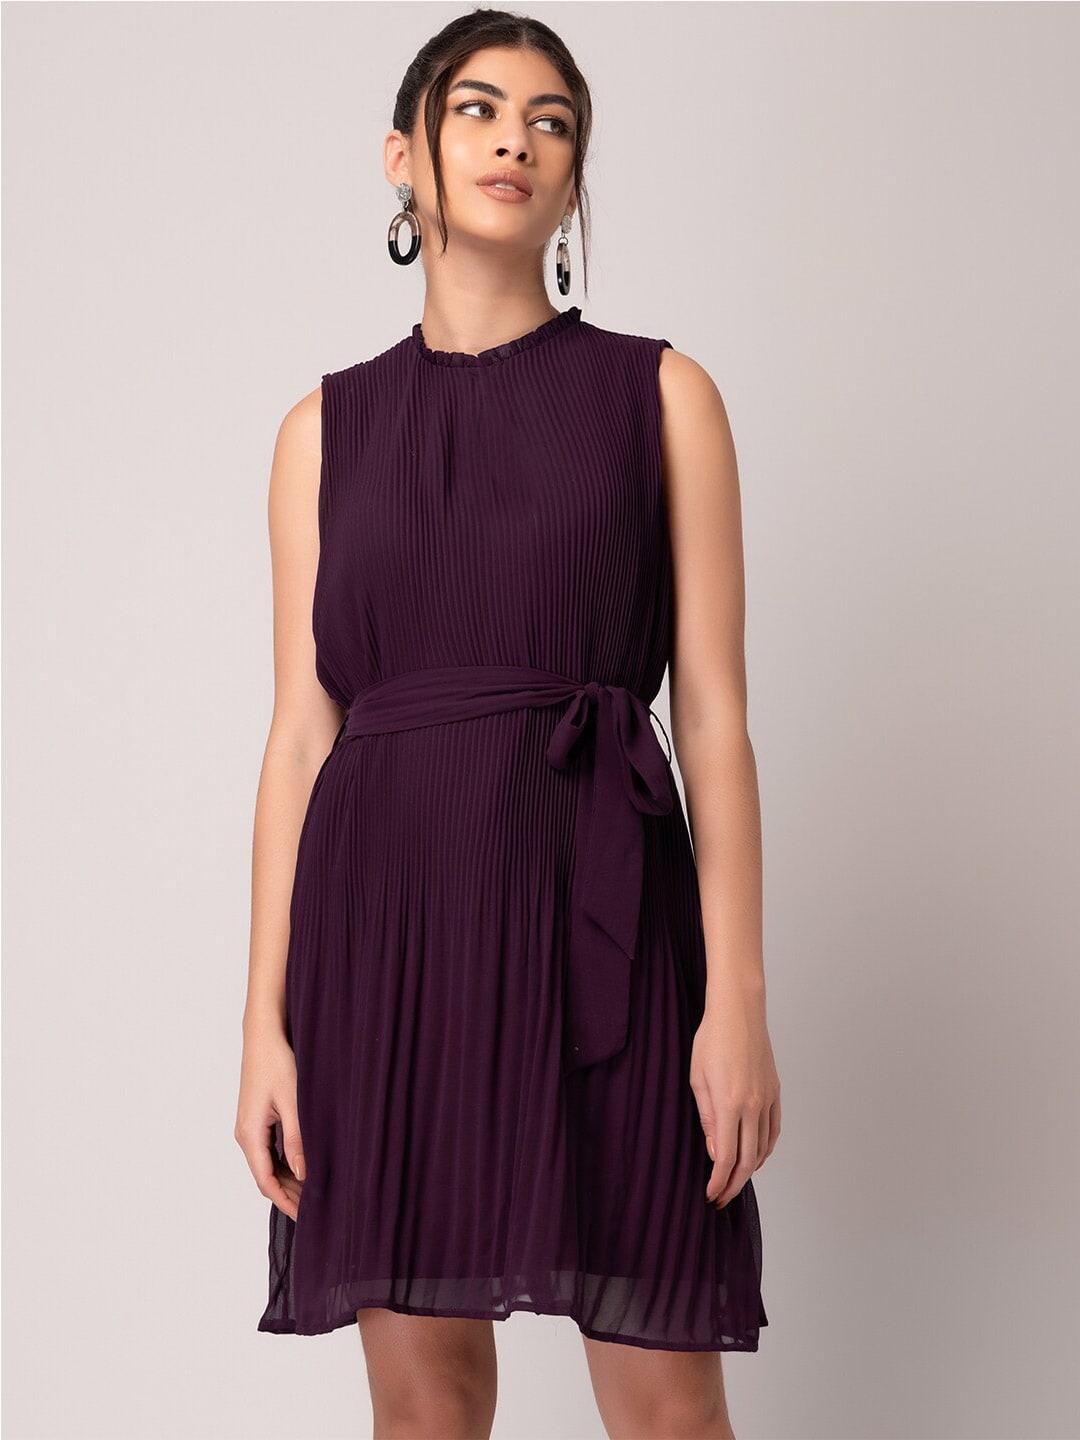 faballey maroon round neck pleated detail a-line dress